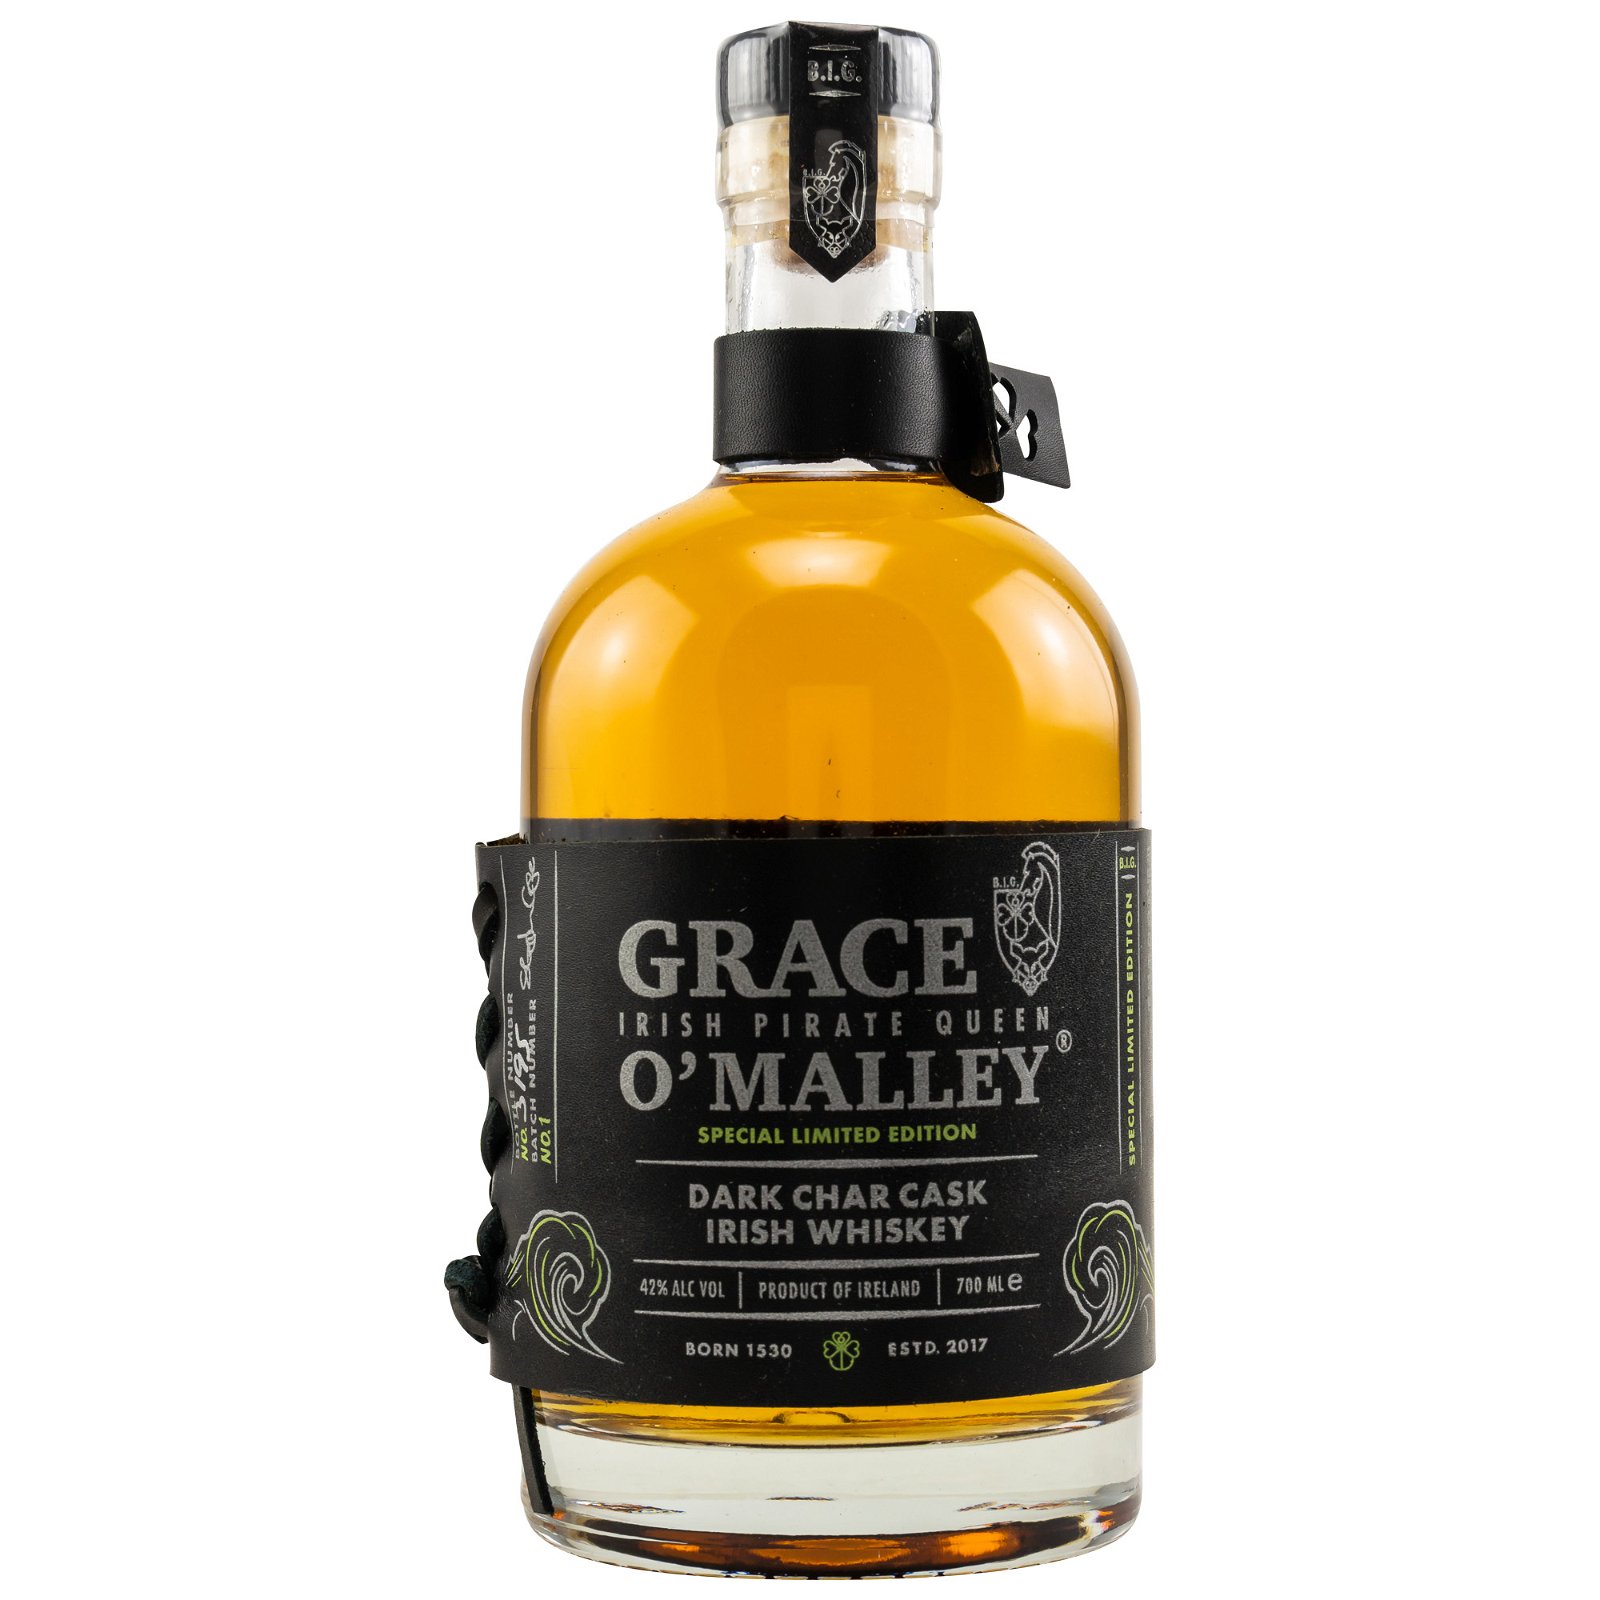 Grace O'Malley Blended Irish Whiskey Dark Char Cask Finish Special Limited Edition